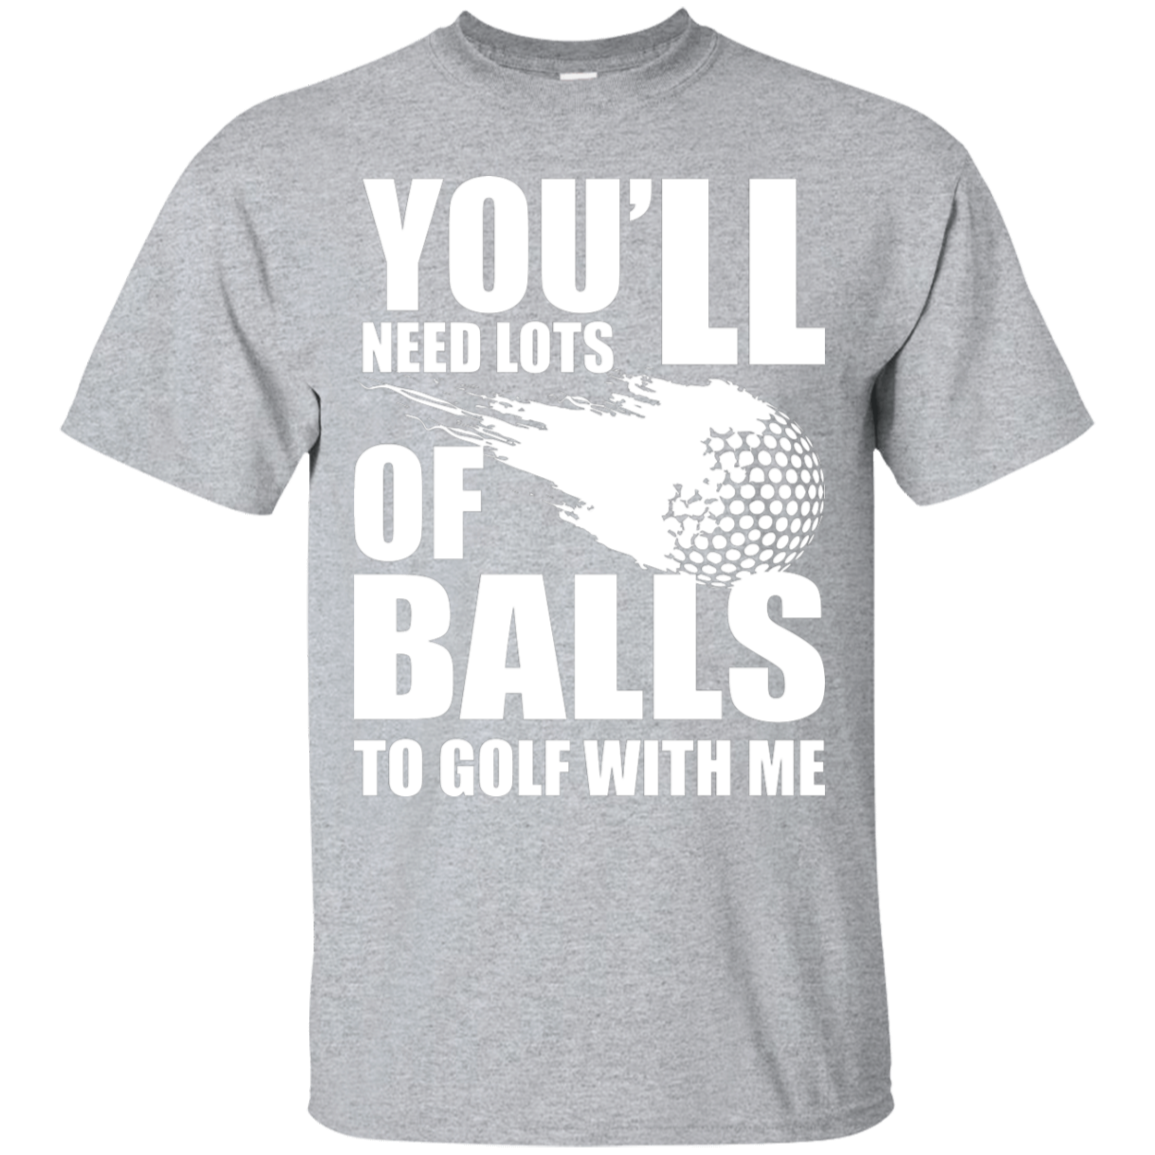 You'll Need Lots Of Balls Play Golf With Me T-Shirt Apparel - The Beer Lodge